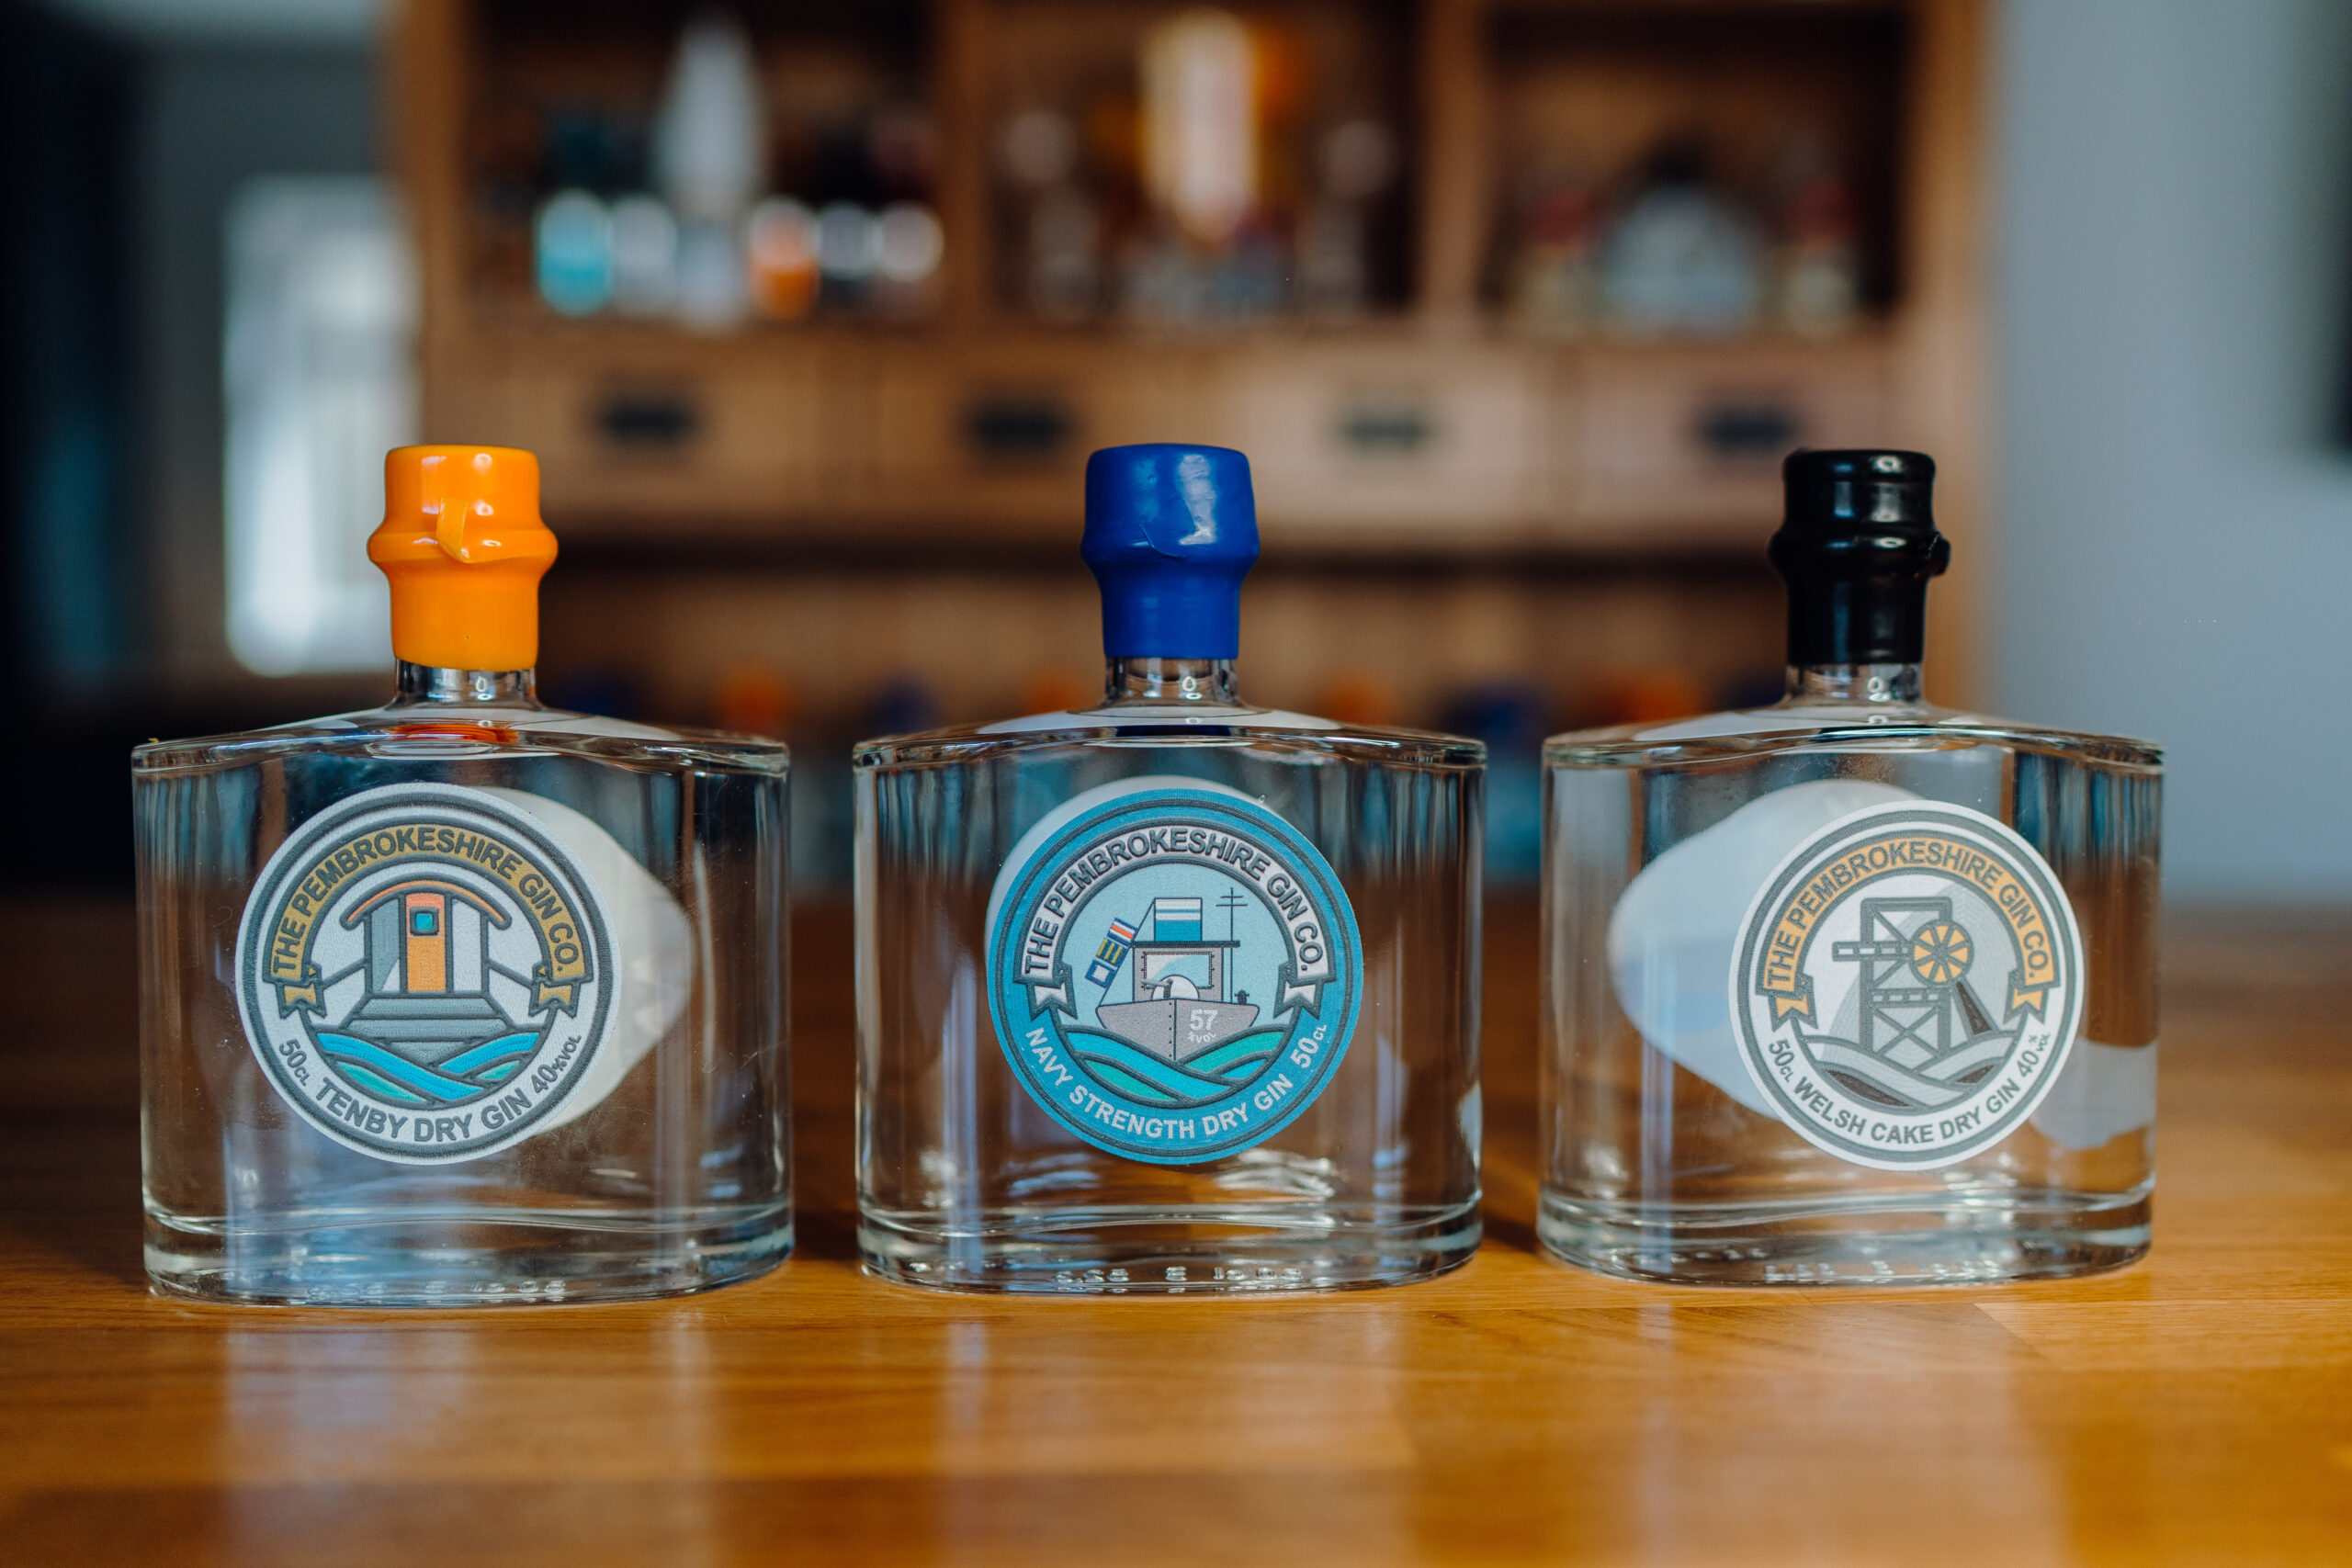 Father’s Day Giveaway – Win a Bottle of Pembrokeshire Gin Co. worth £39.99